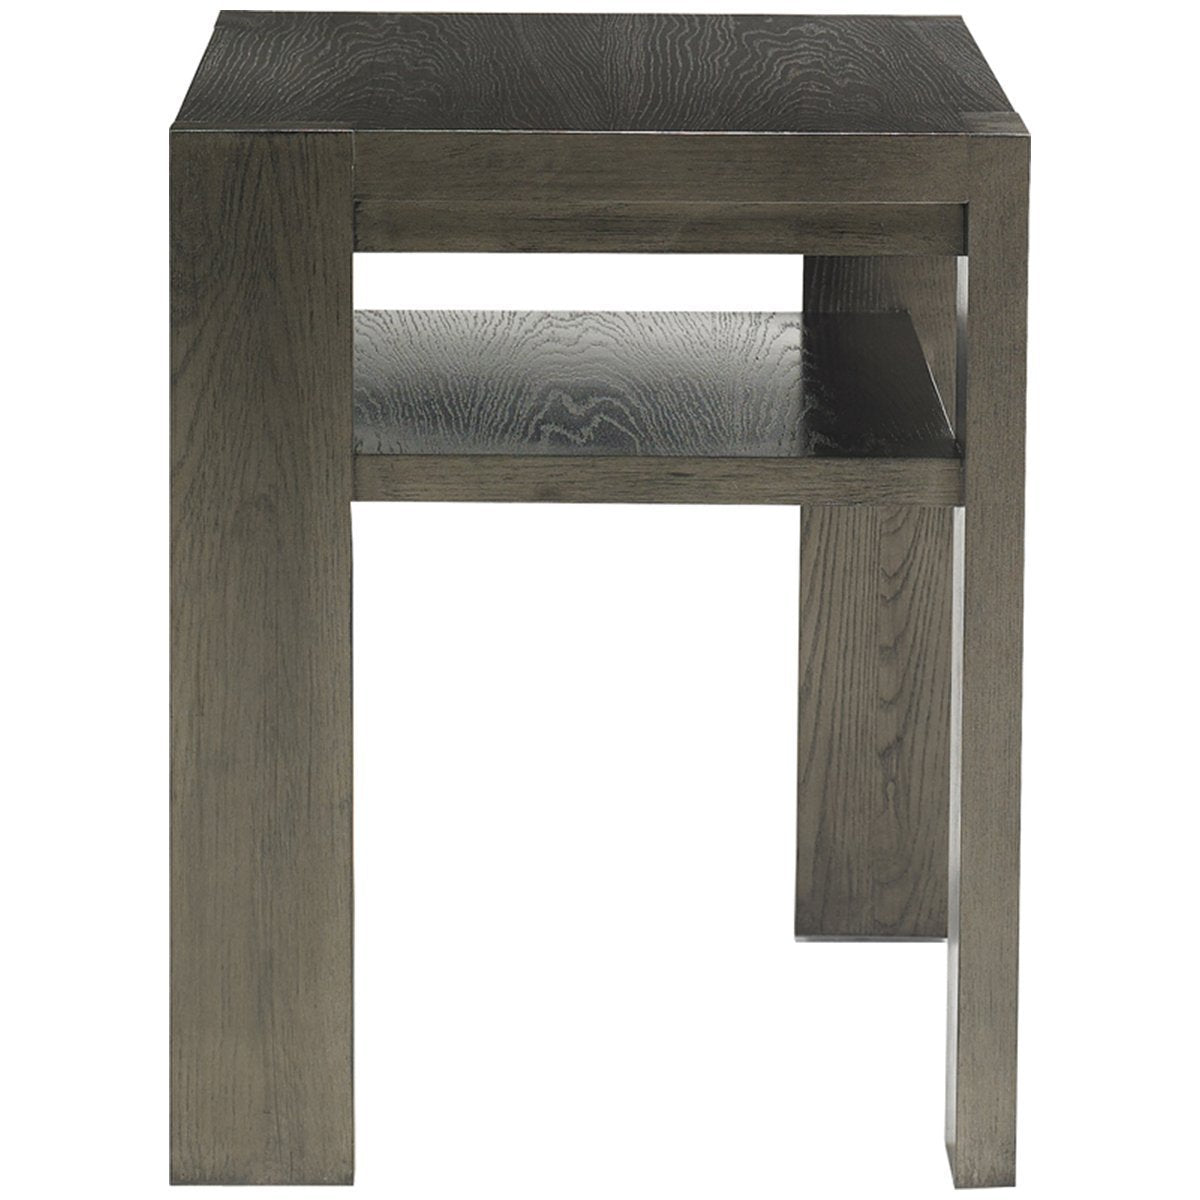 CTH Sherrill Occasional Flint Rectangular End Table